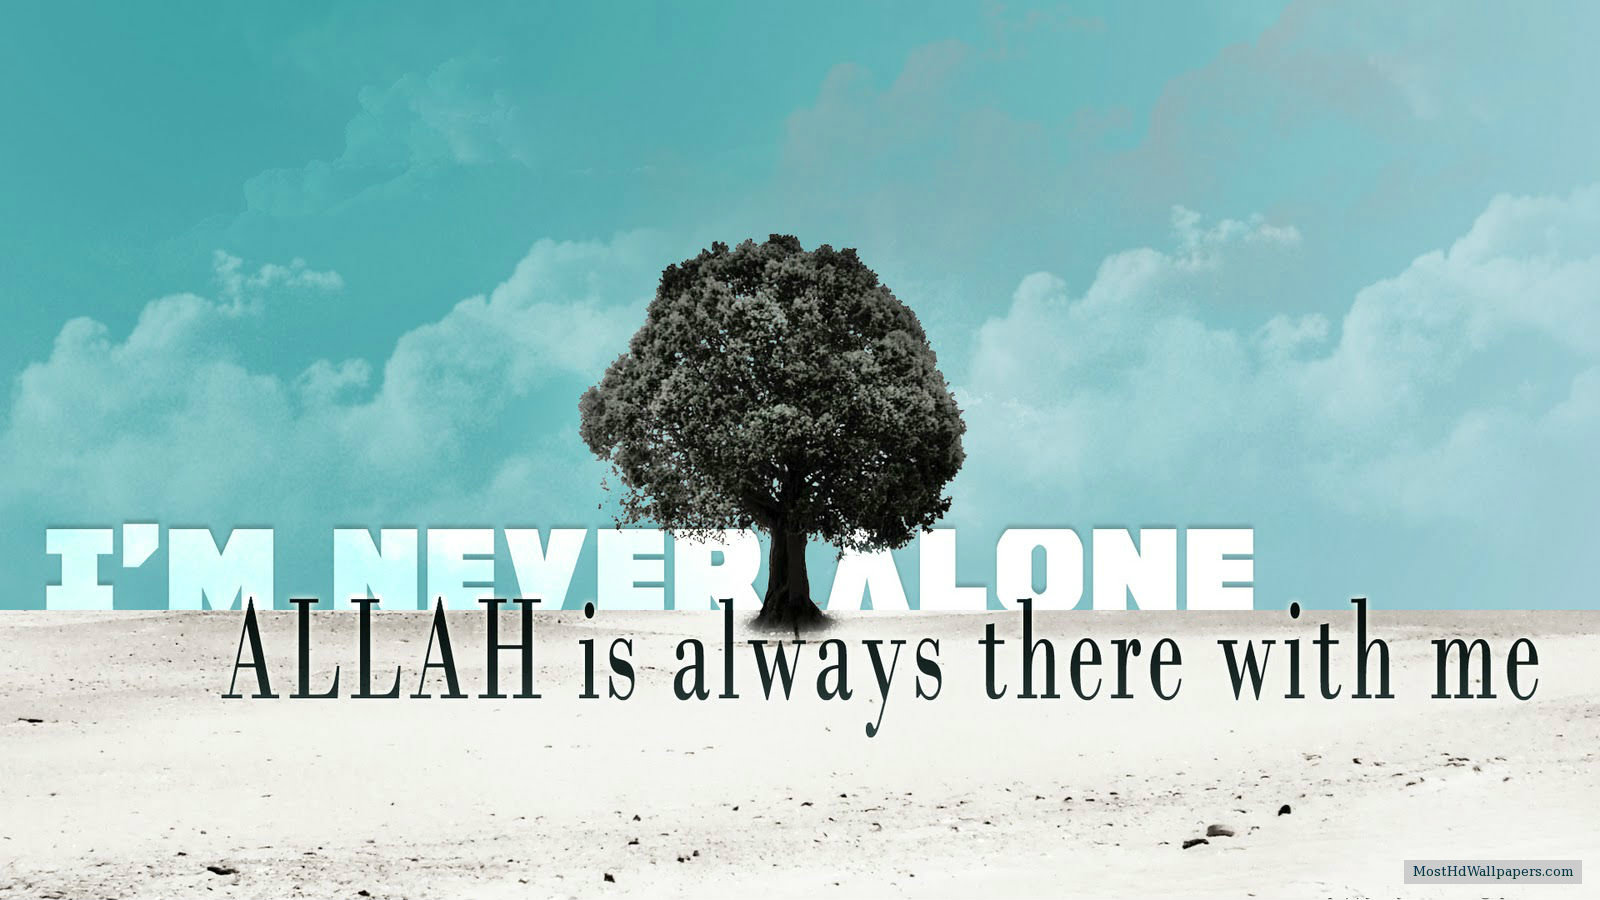 Most Beautiful HD Islamic Quotes Image Wallpaper Pictures